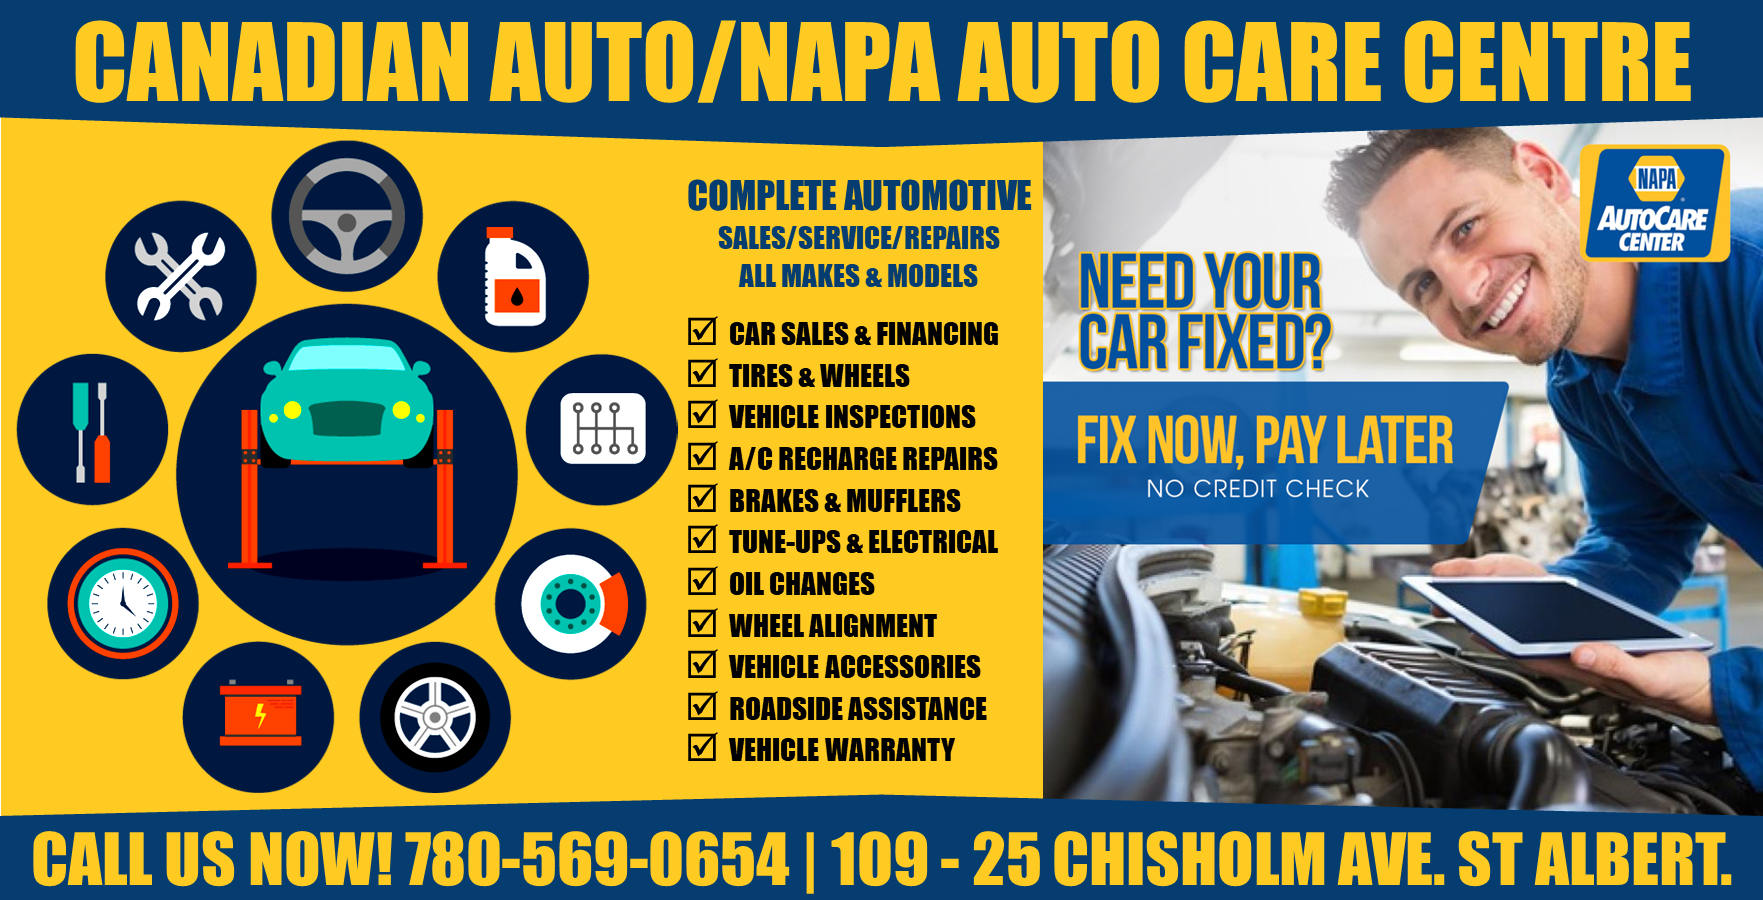 Fix your car now and pay later.